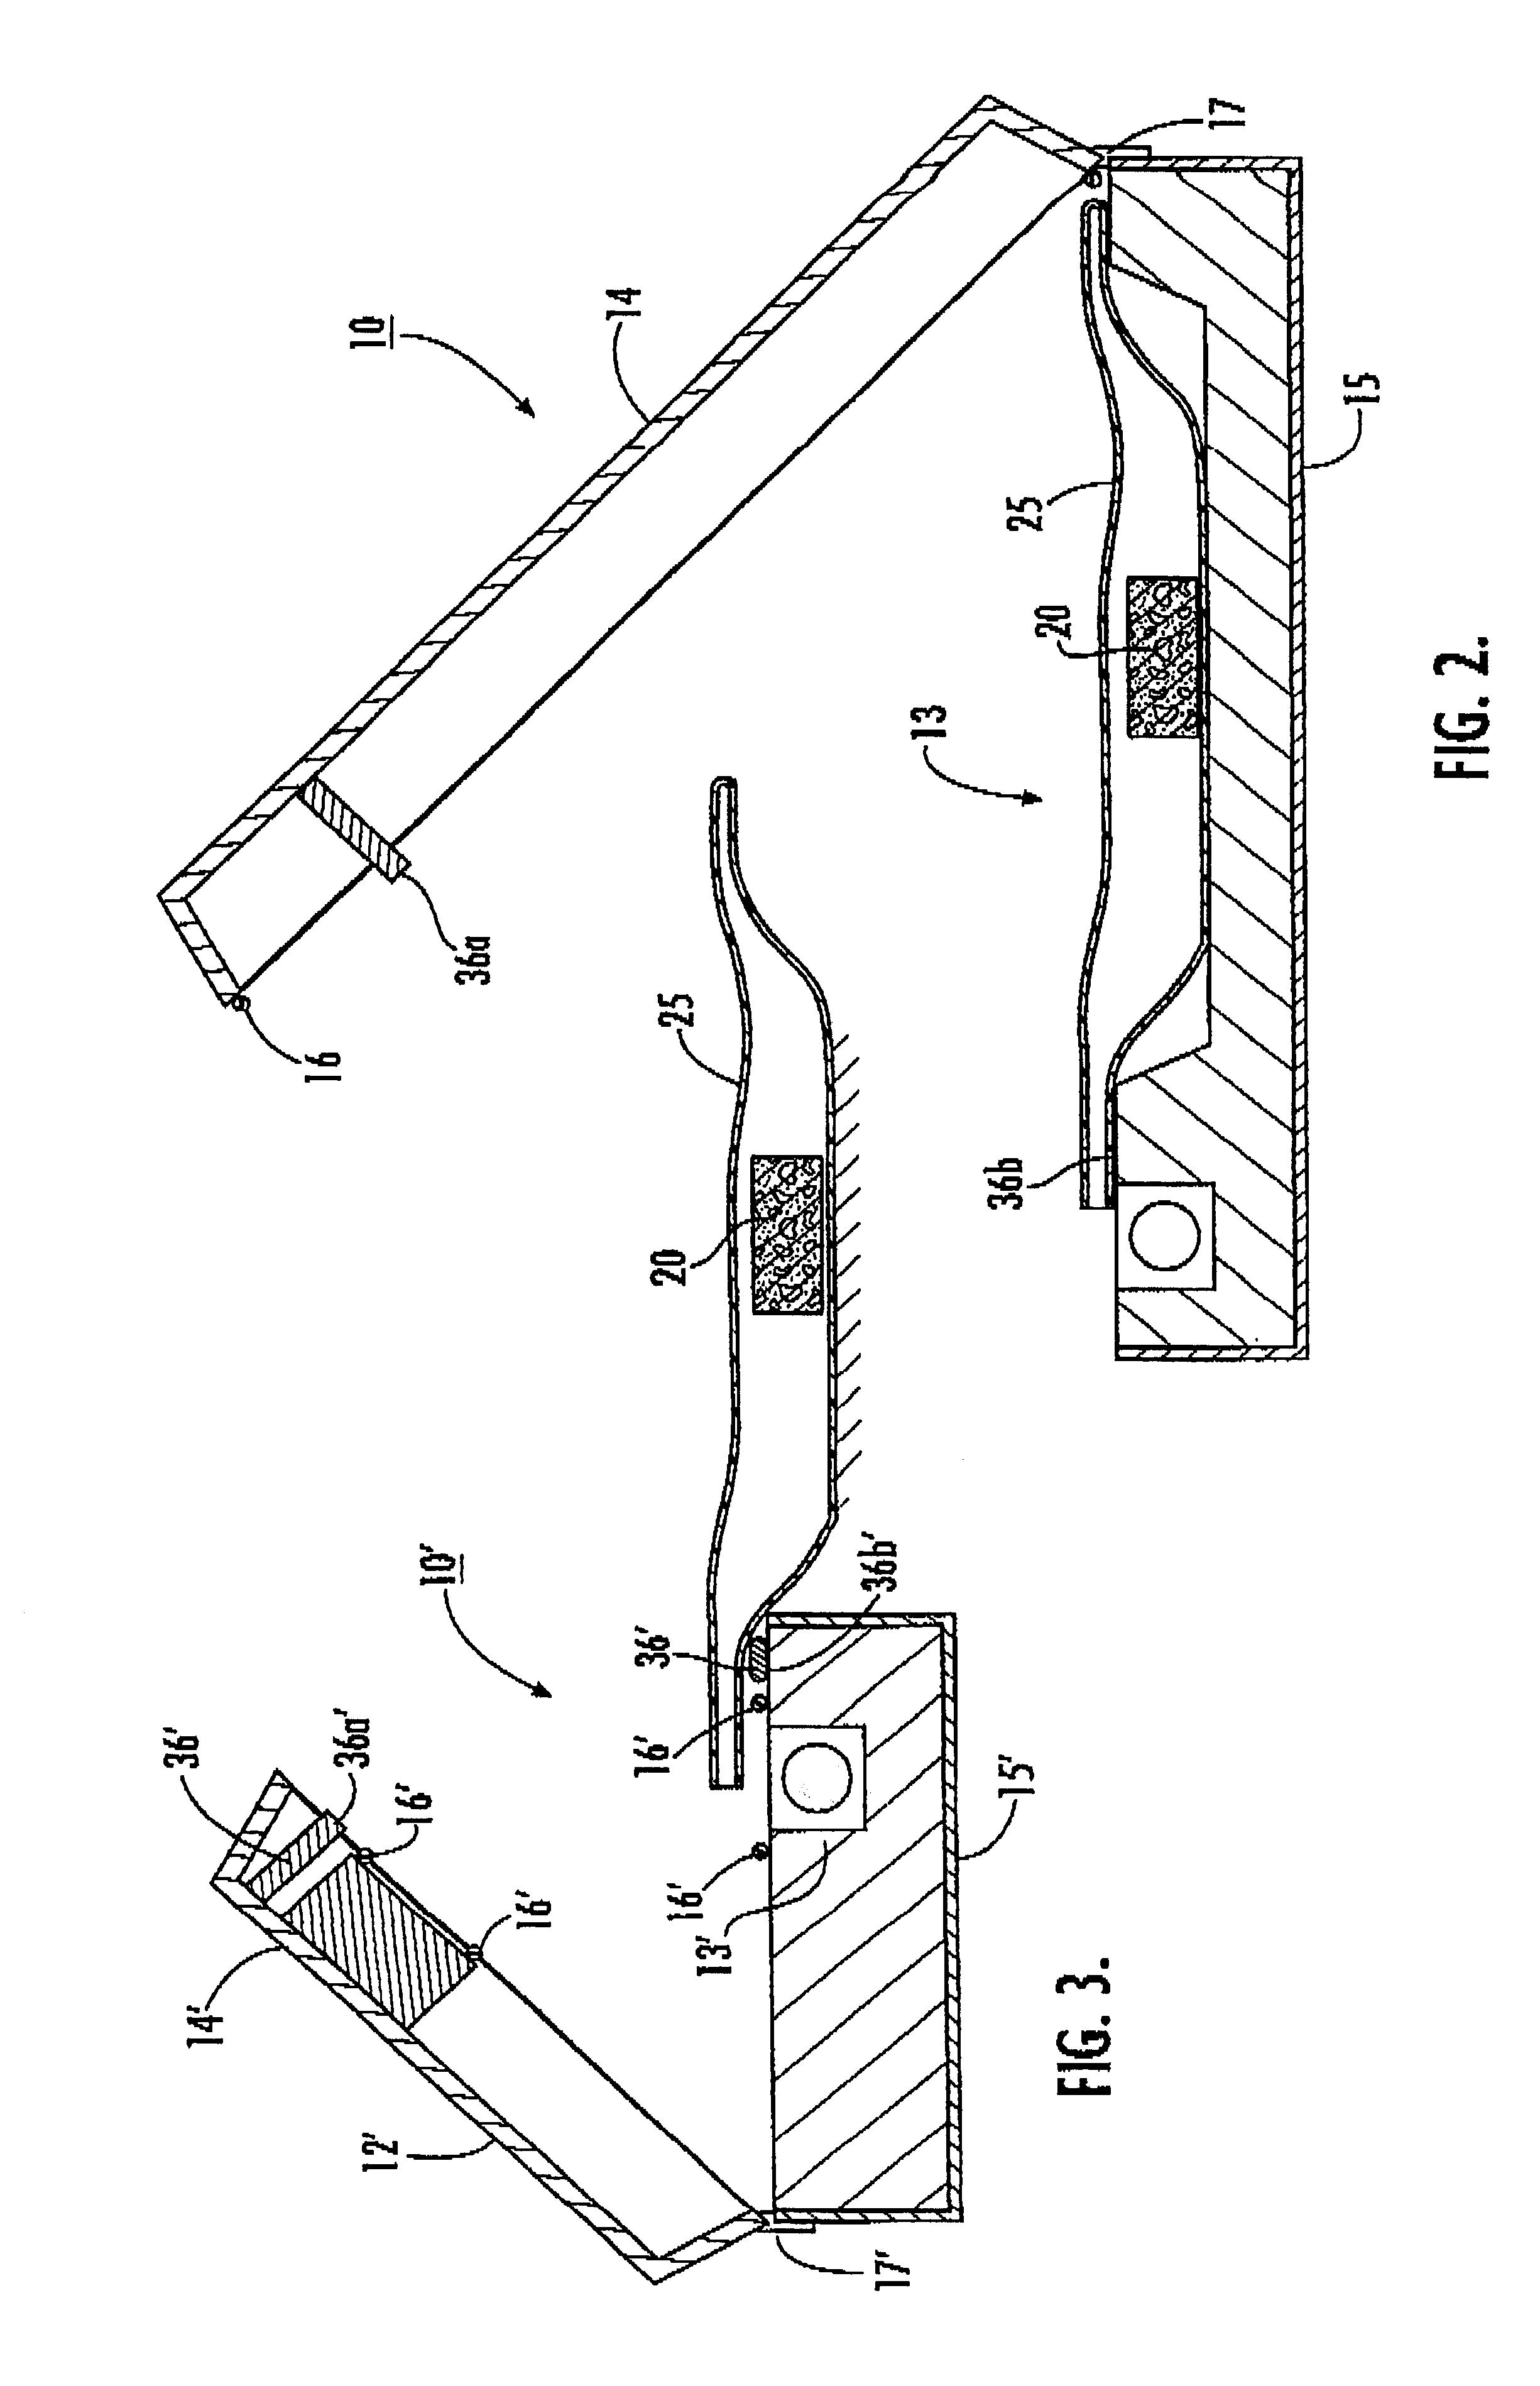 Methods and apparatus for sealing a porous material sample for density determination using water displacement methods and associated surface conformal resilient compressible bags